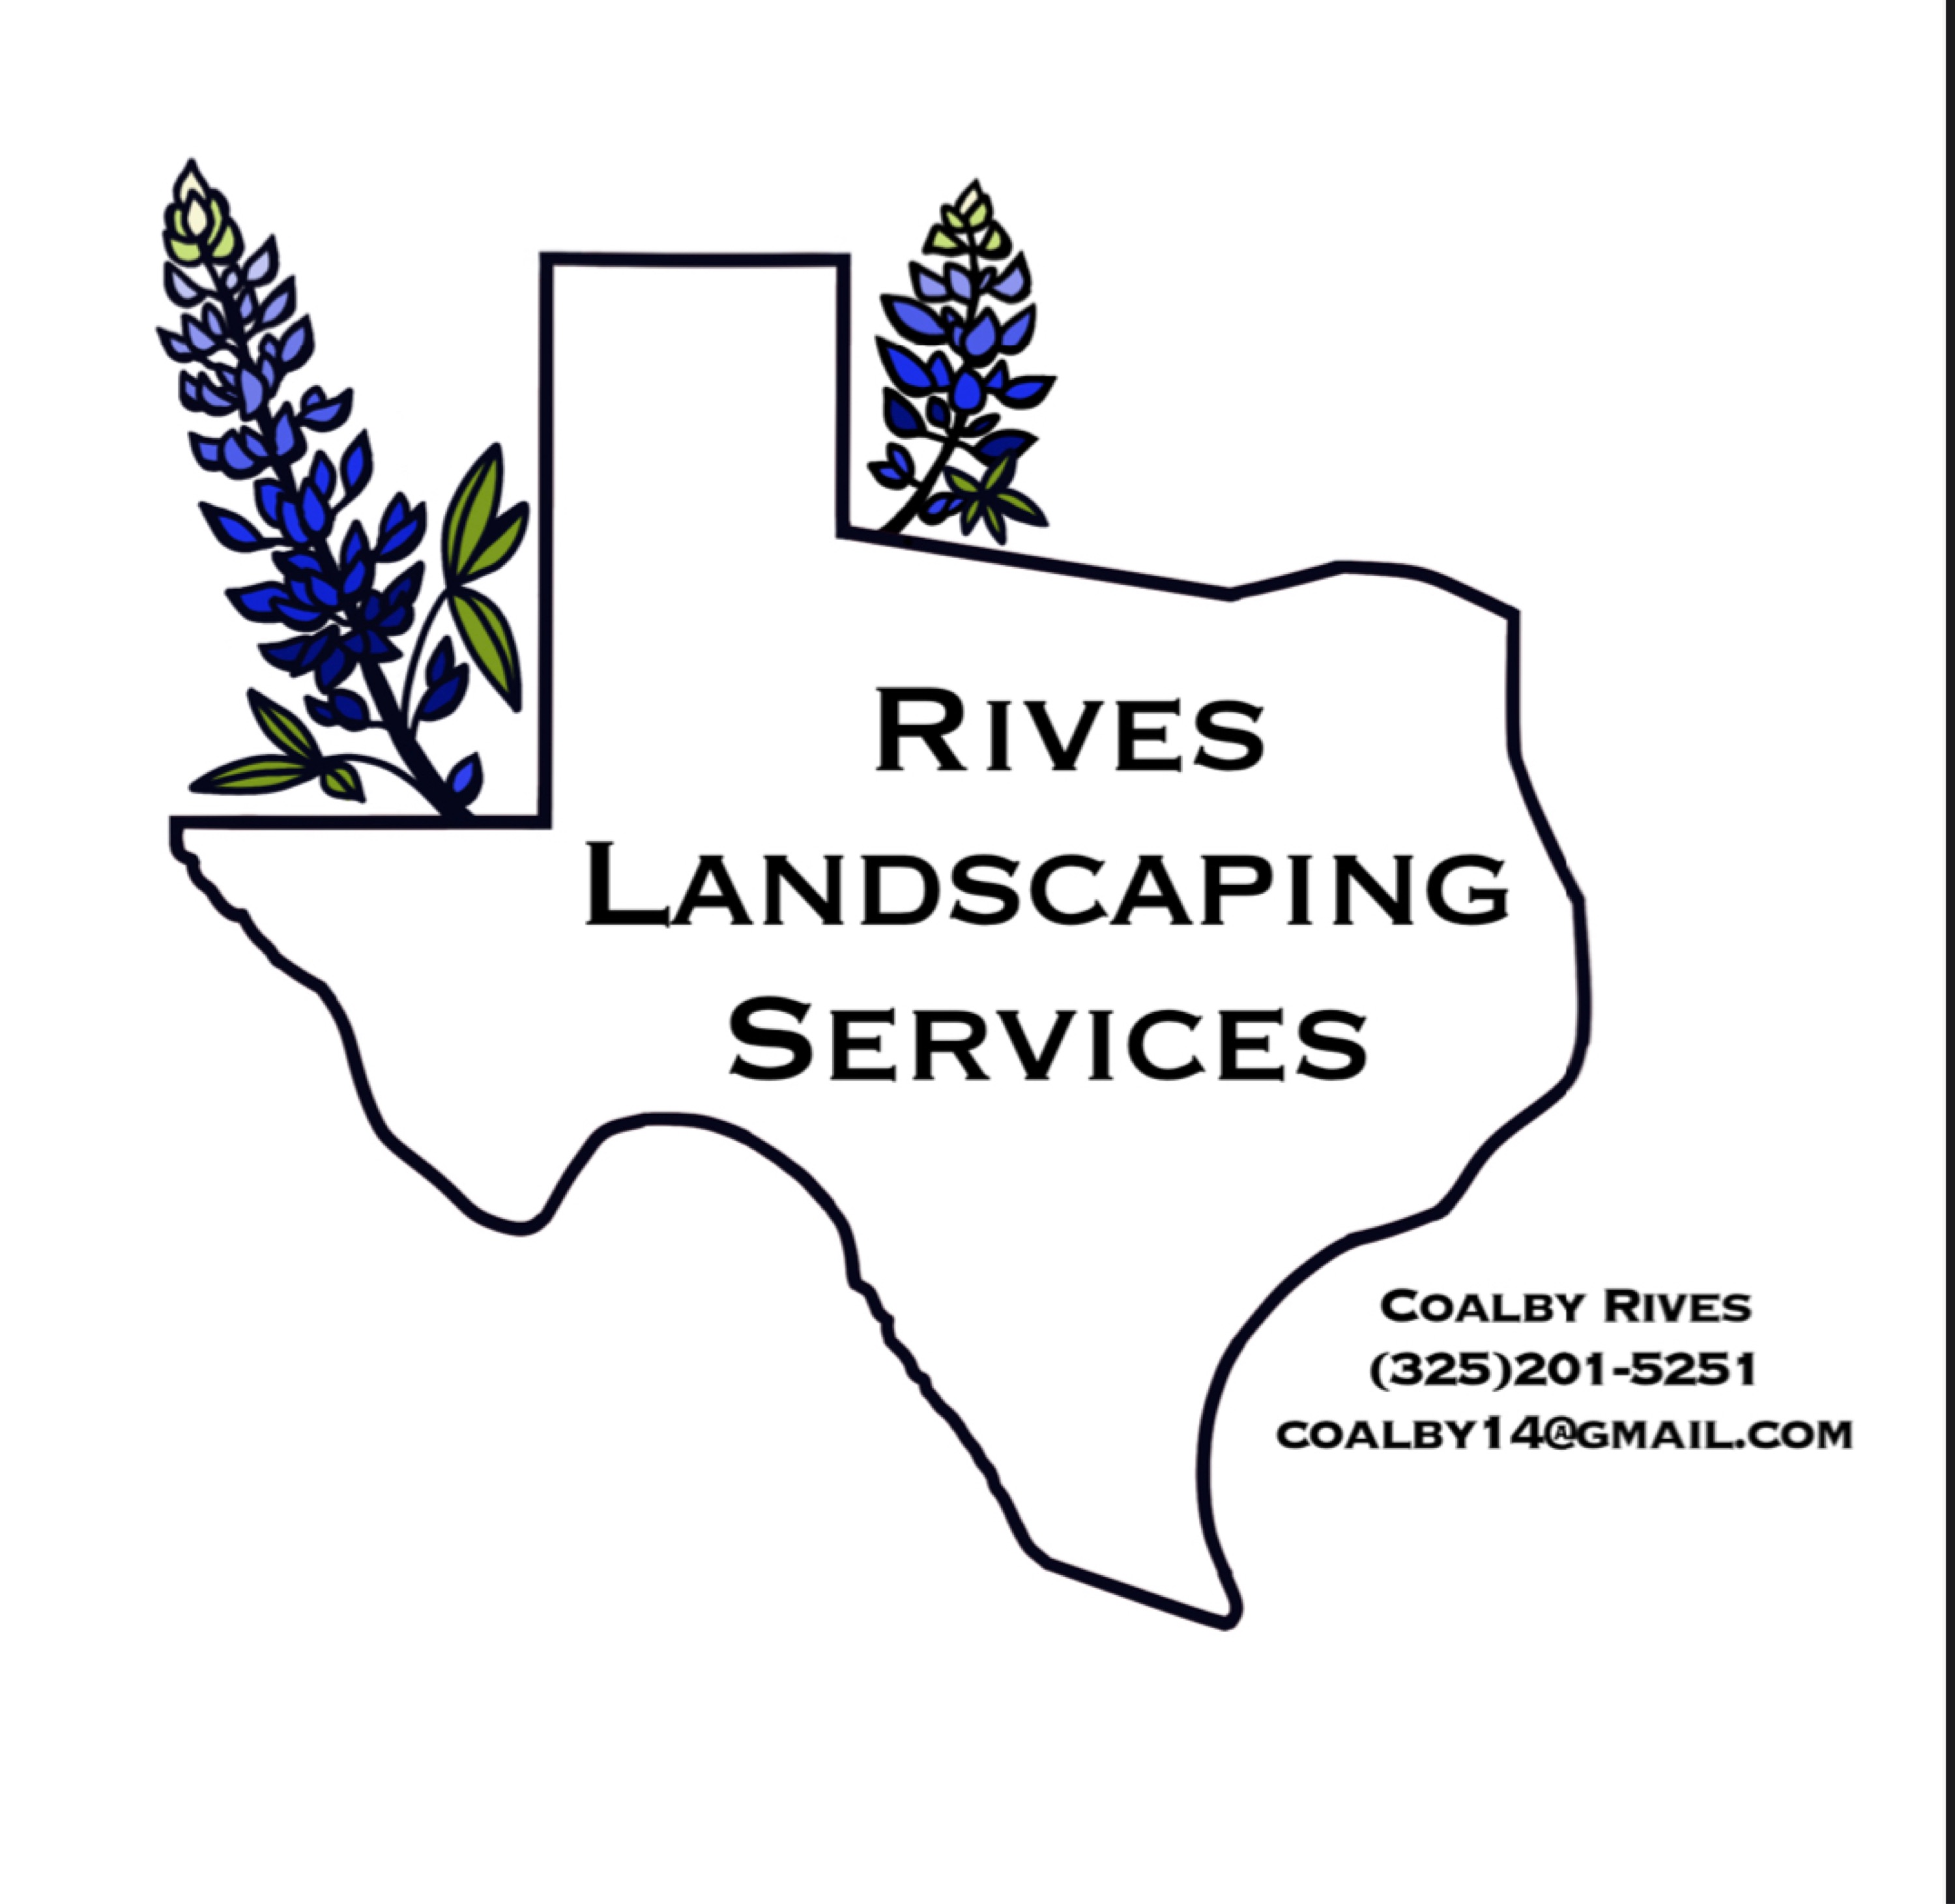 Rives Landscaping Services Logo